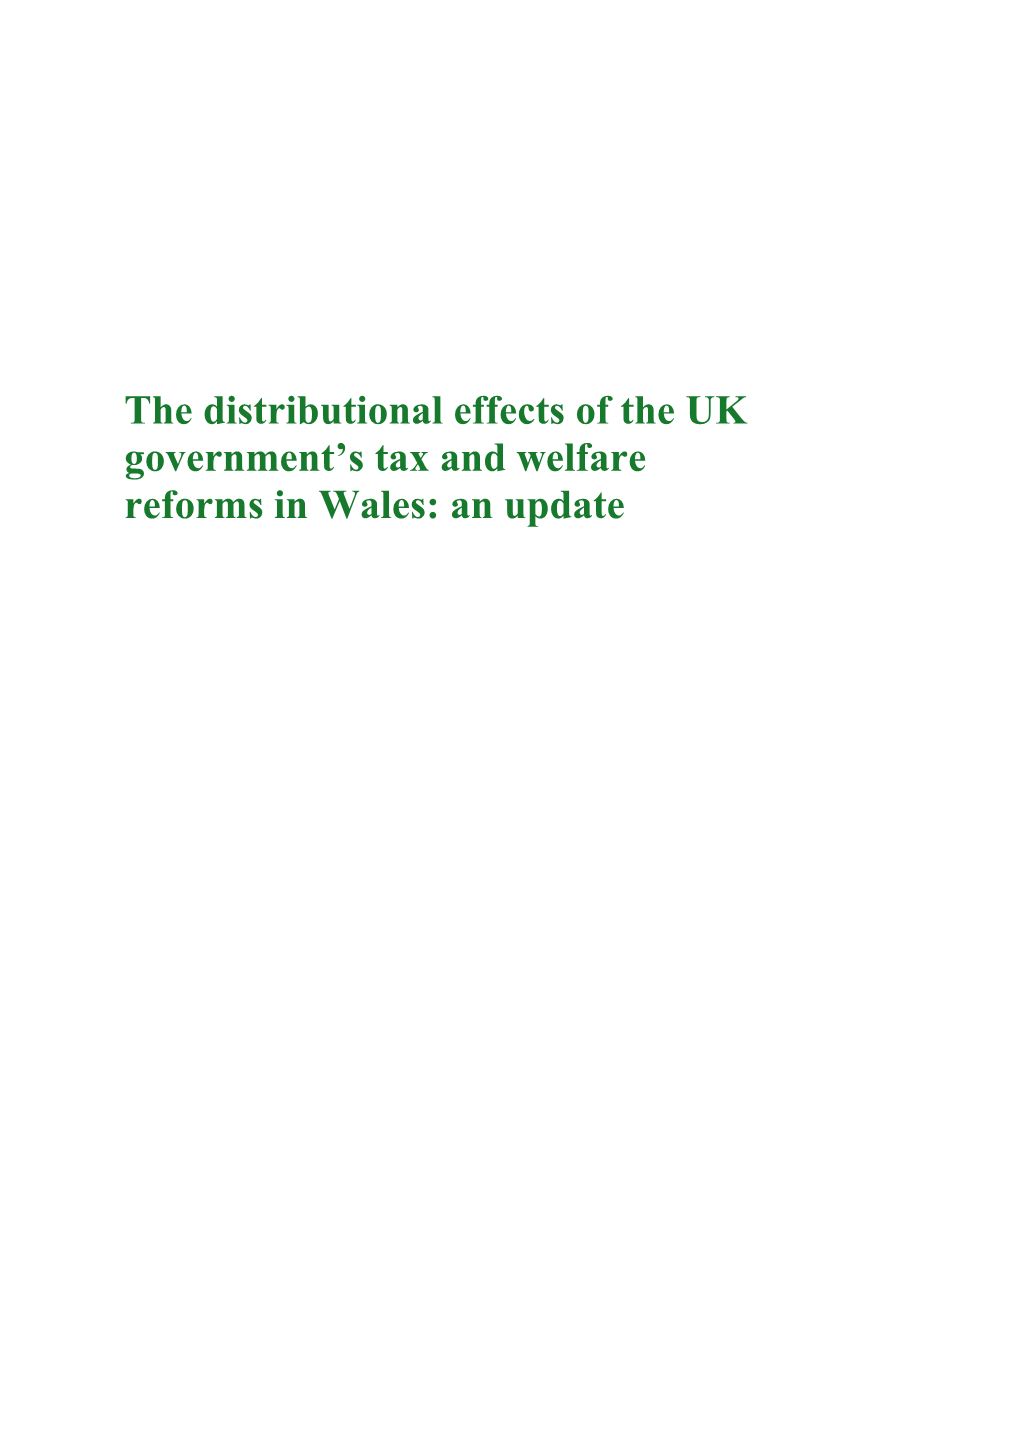 The Distributional Effects Oftheuk Government S Tax and Welfare Reforms in Wales:Anupdate